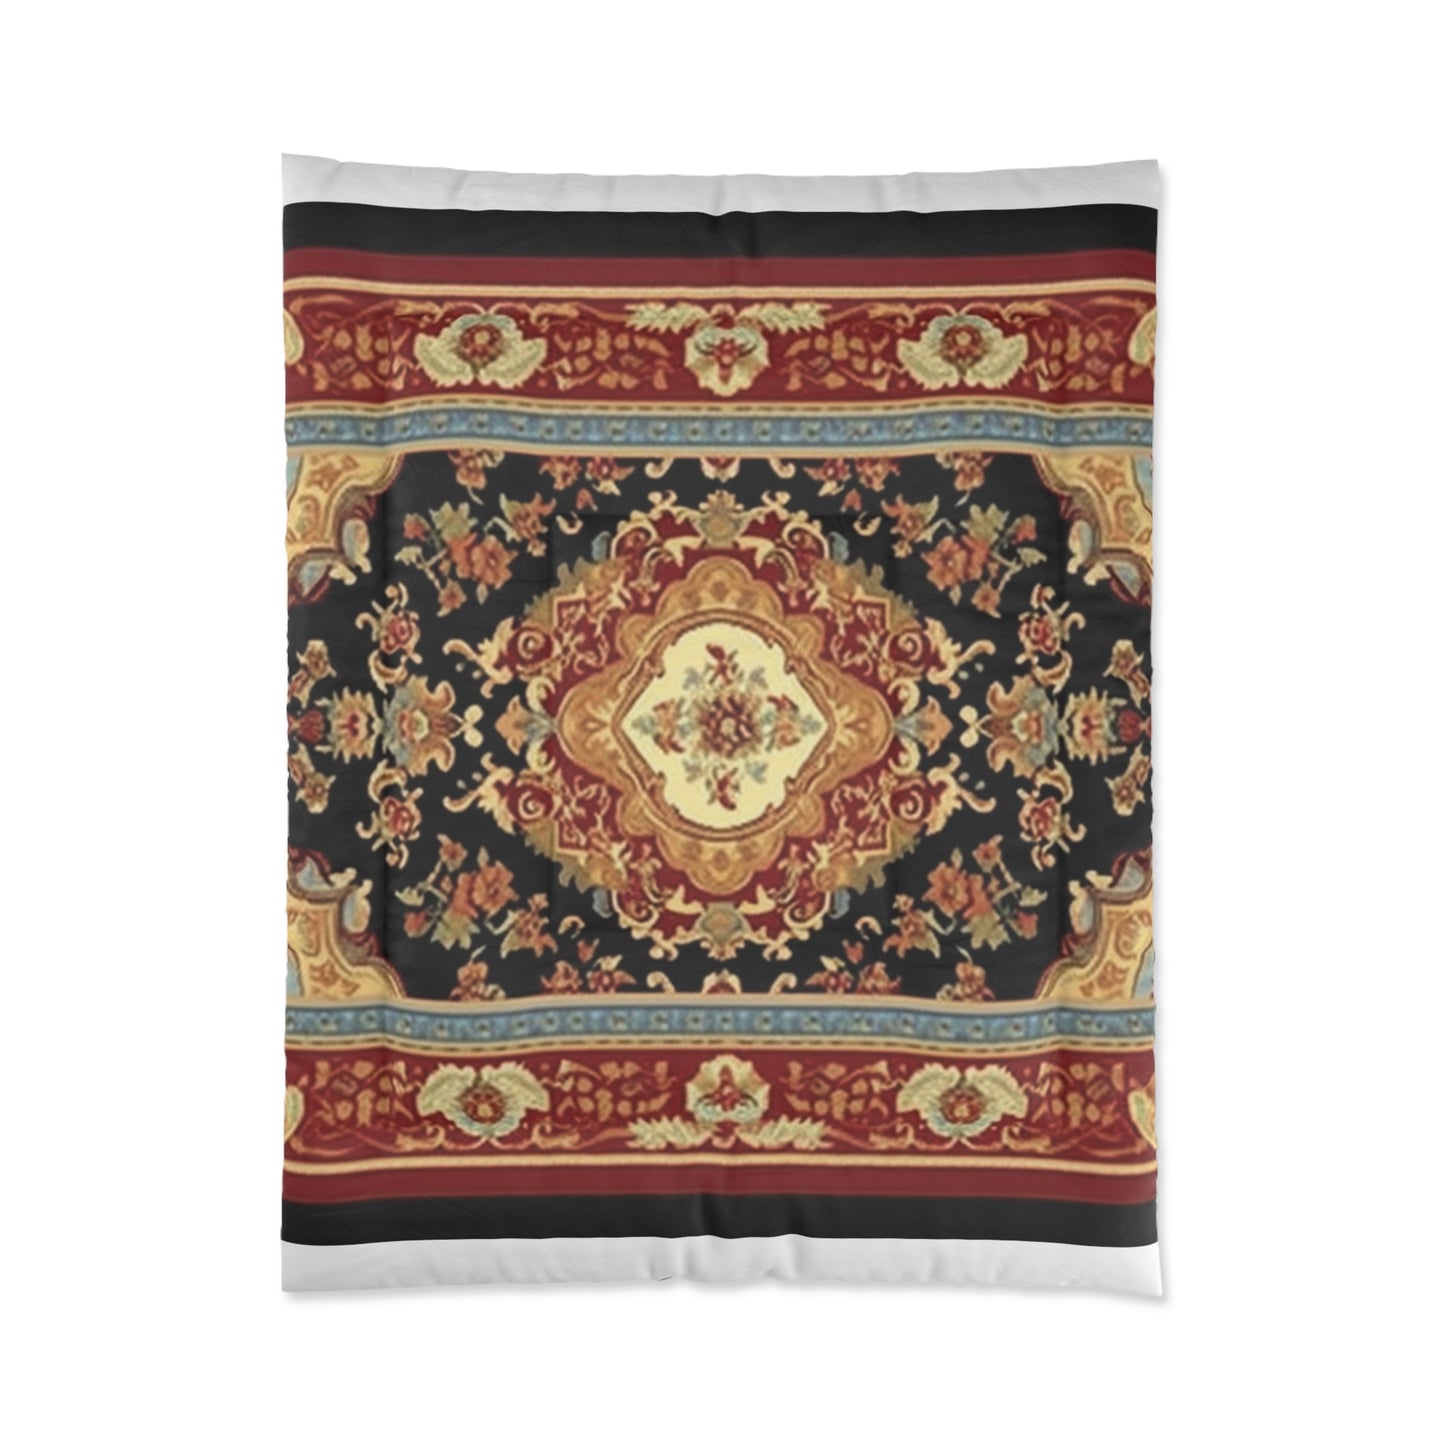 Oriental-Inspired Comforter, Soft and Cozy - Twin, Full, Queen, King Sizes